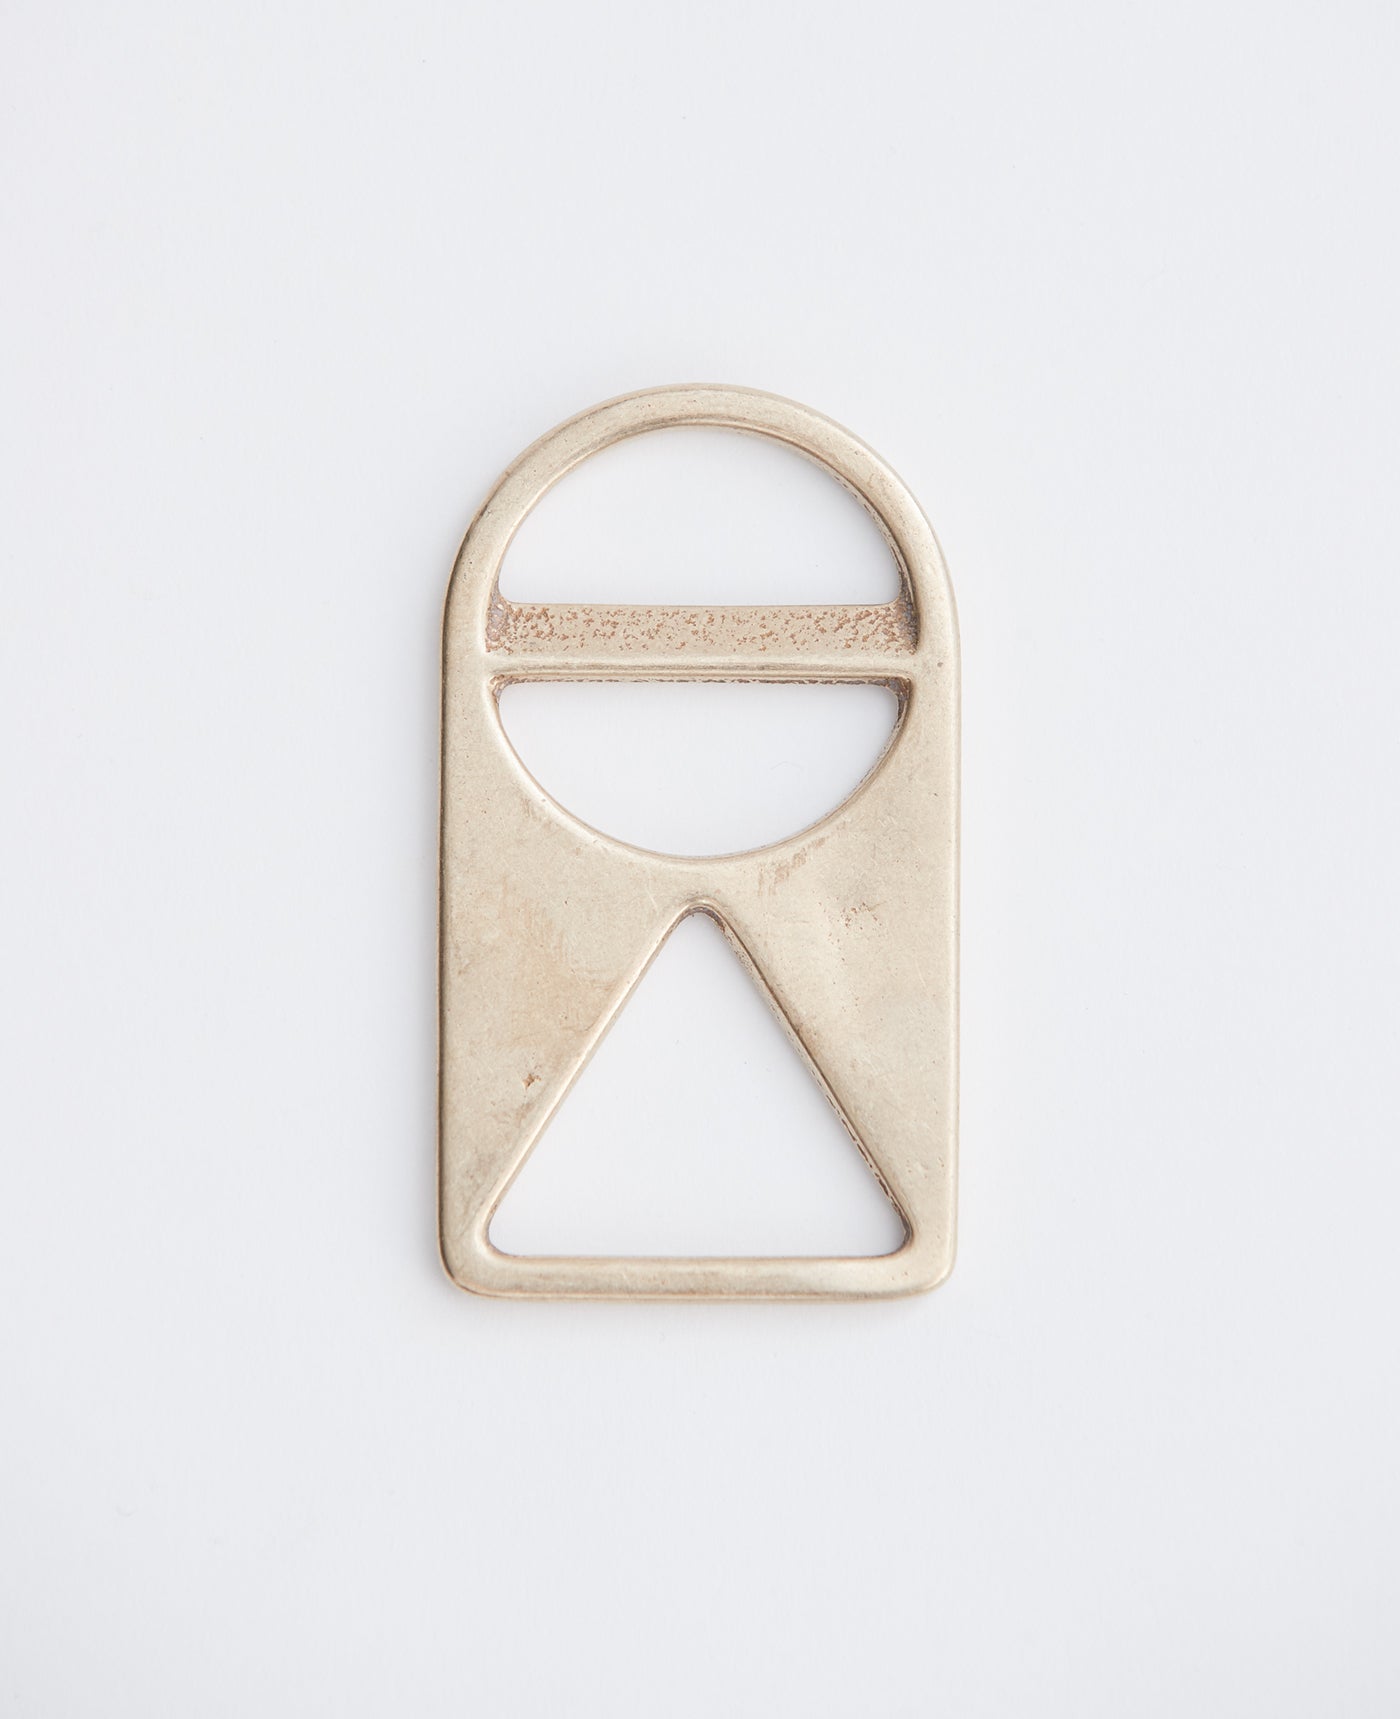 Brass Bottle Opener #2 by The Horse